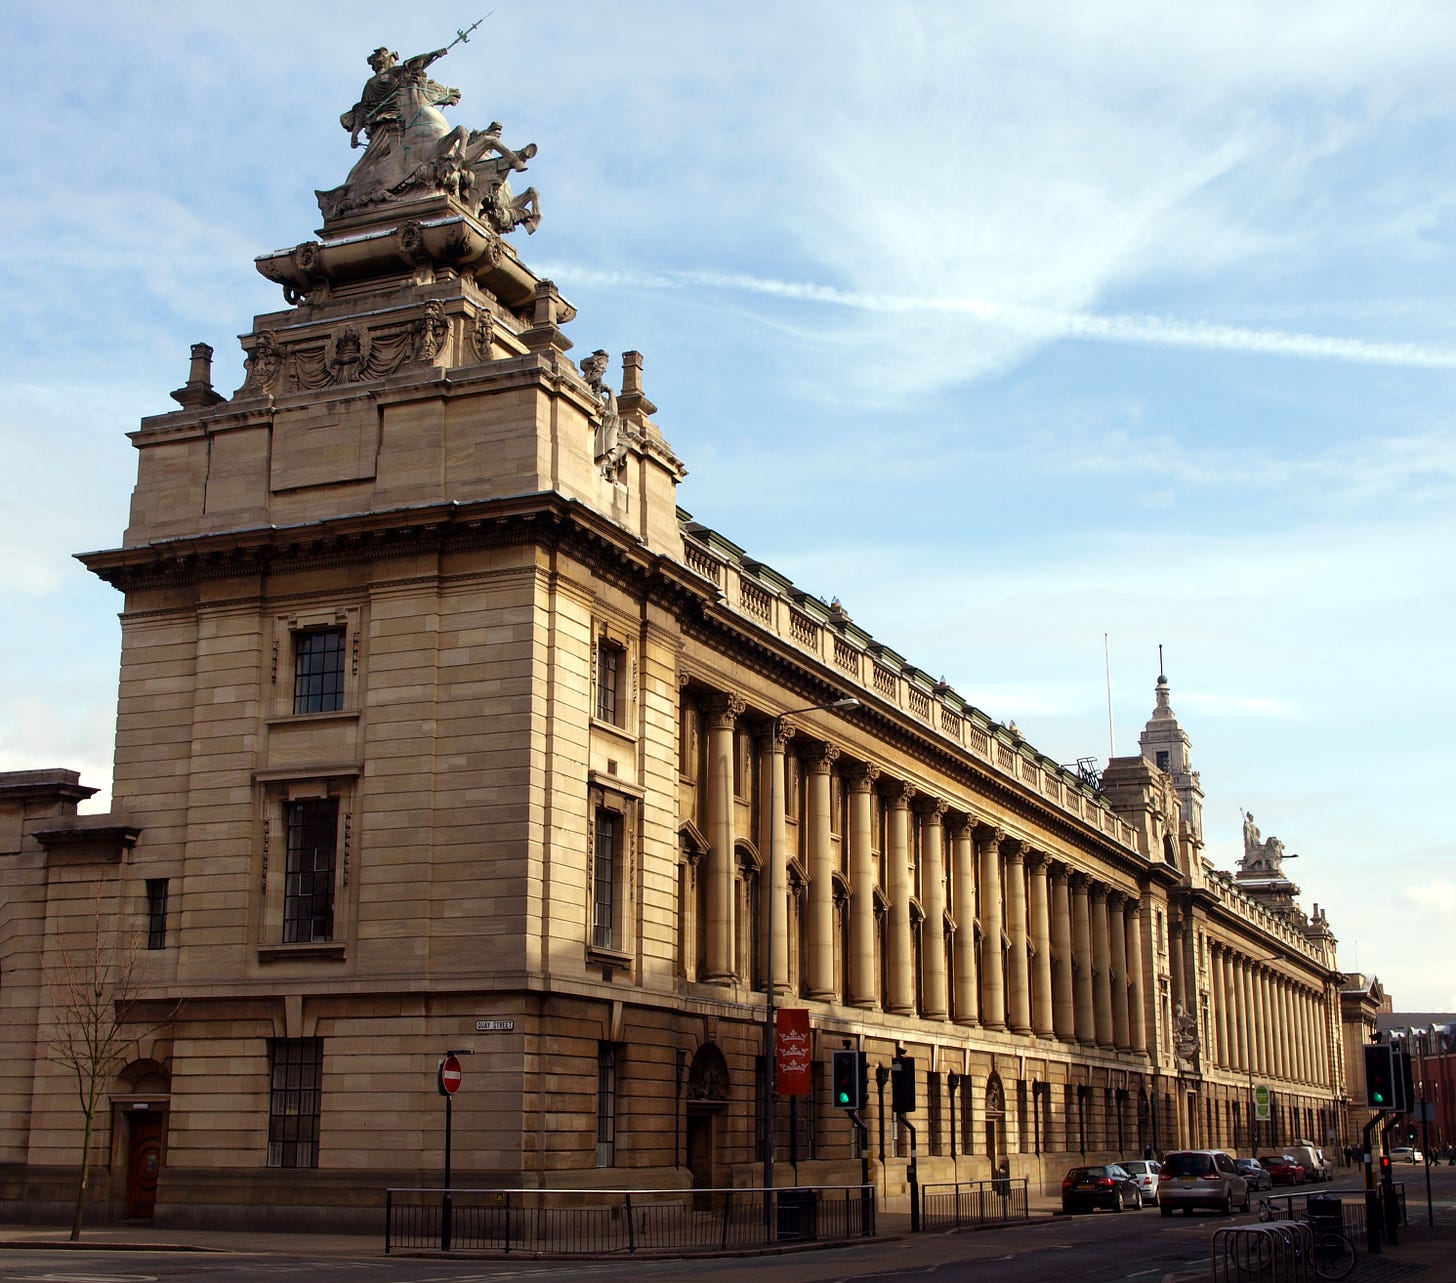 File:Hull's Guildhall - geograph.org.uk - 1758569.jpg - Wikimedia Commons